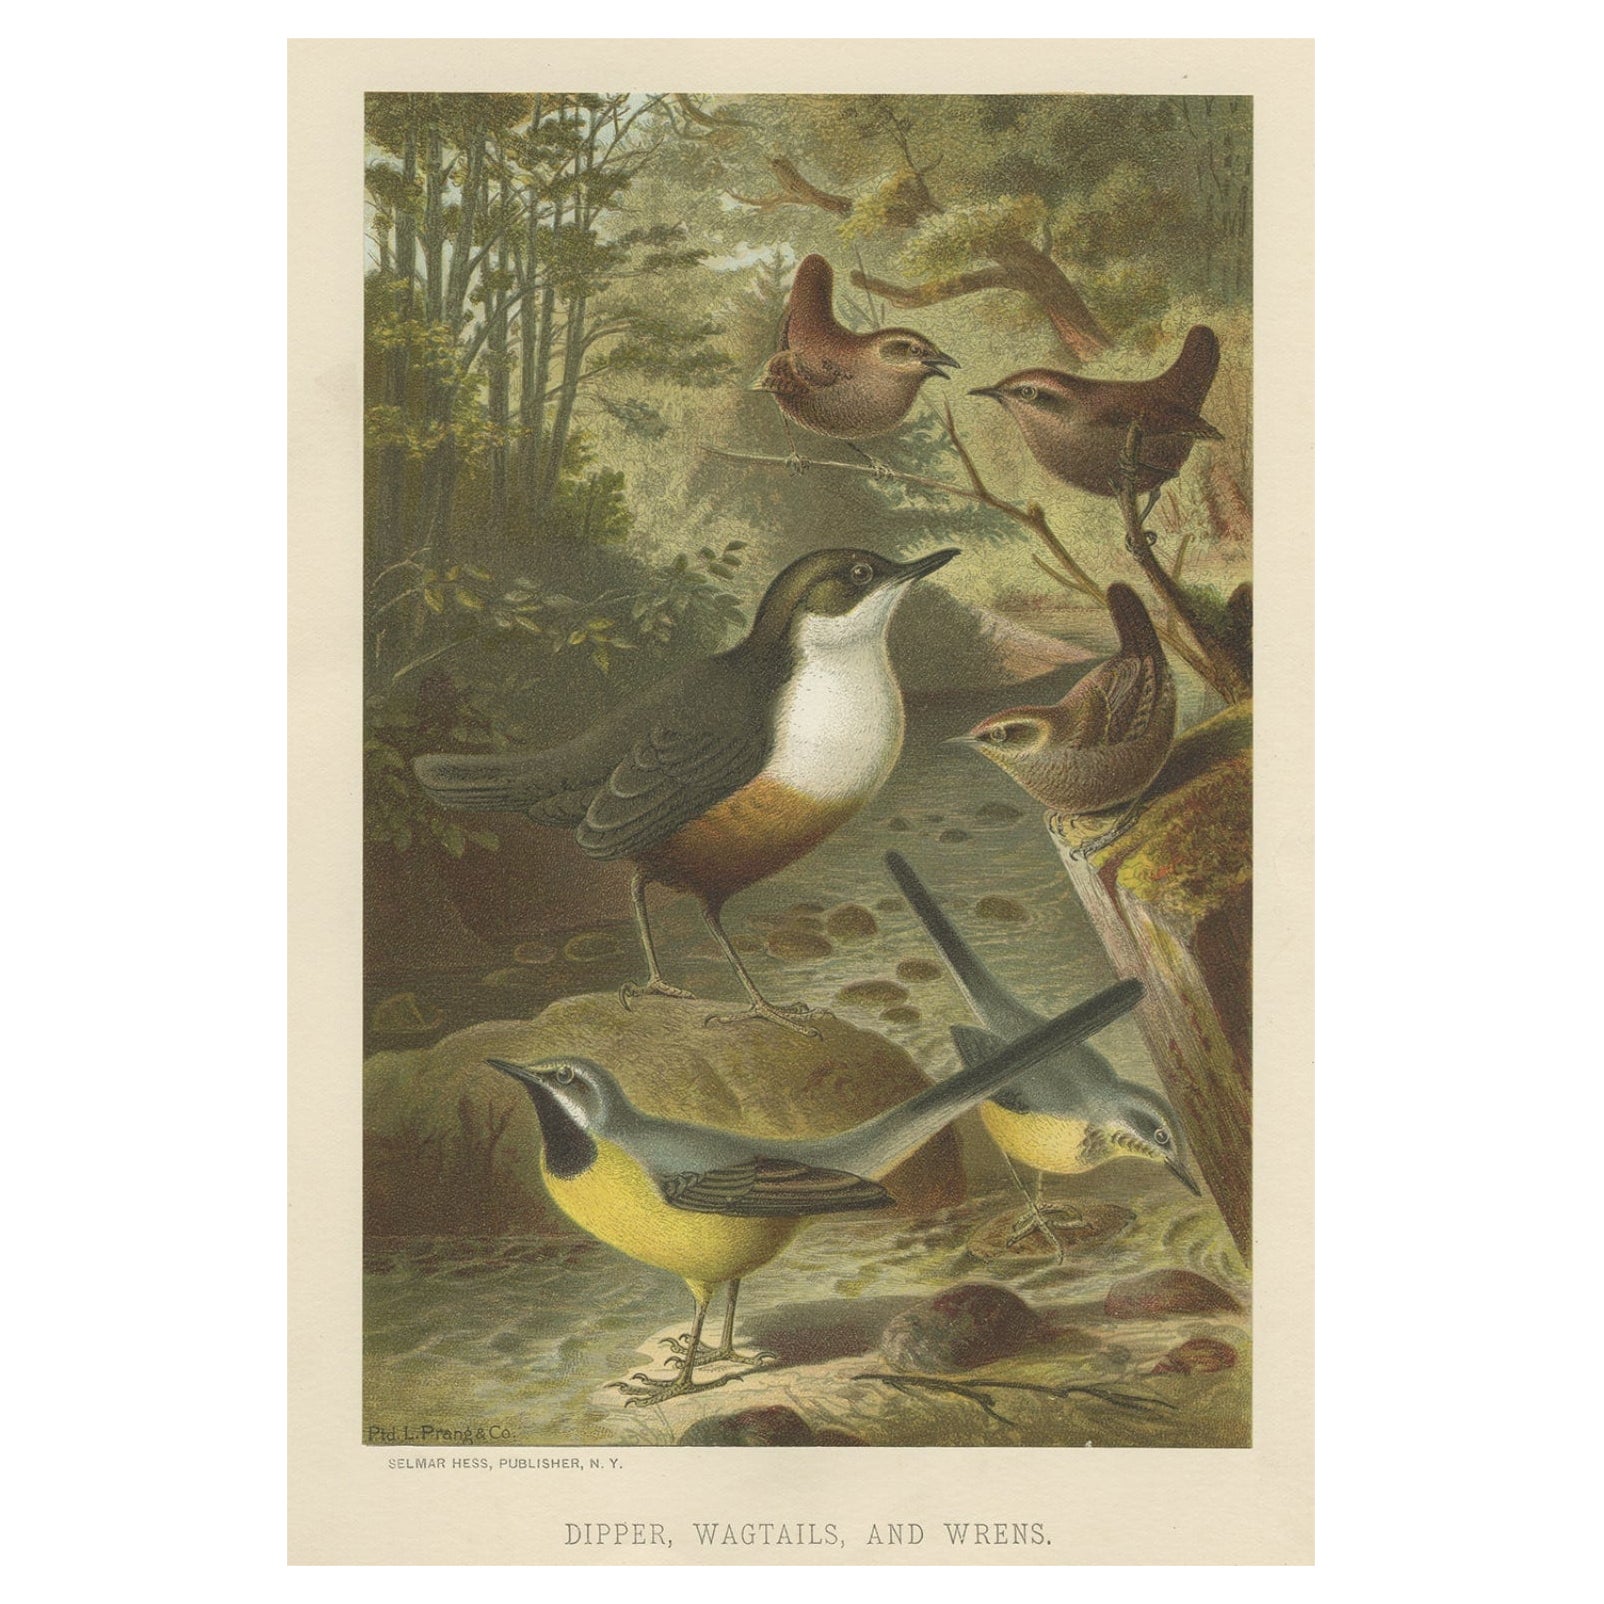 Antique Chromolithographic Bird Print of the Dipper, Wagtail and Wren, 1898